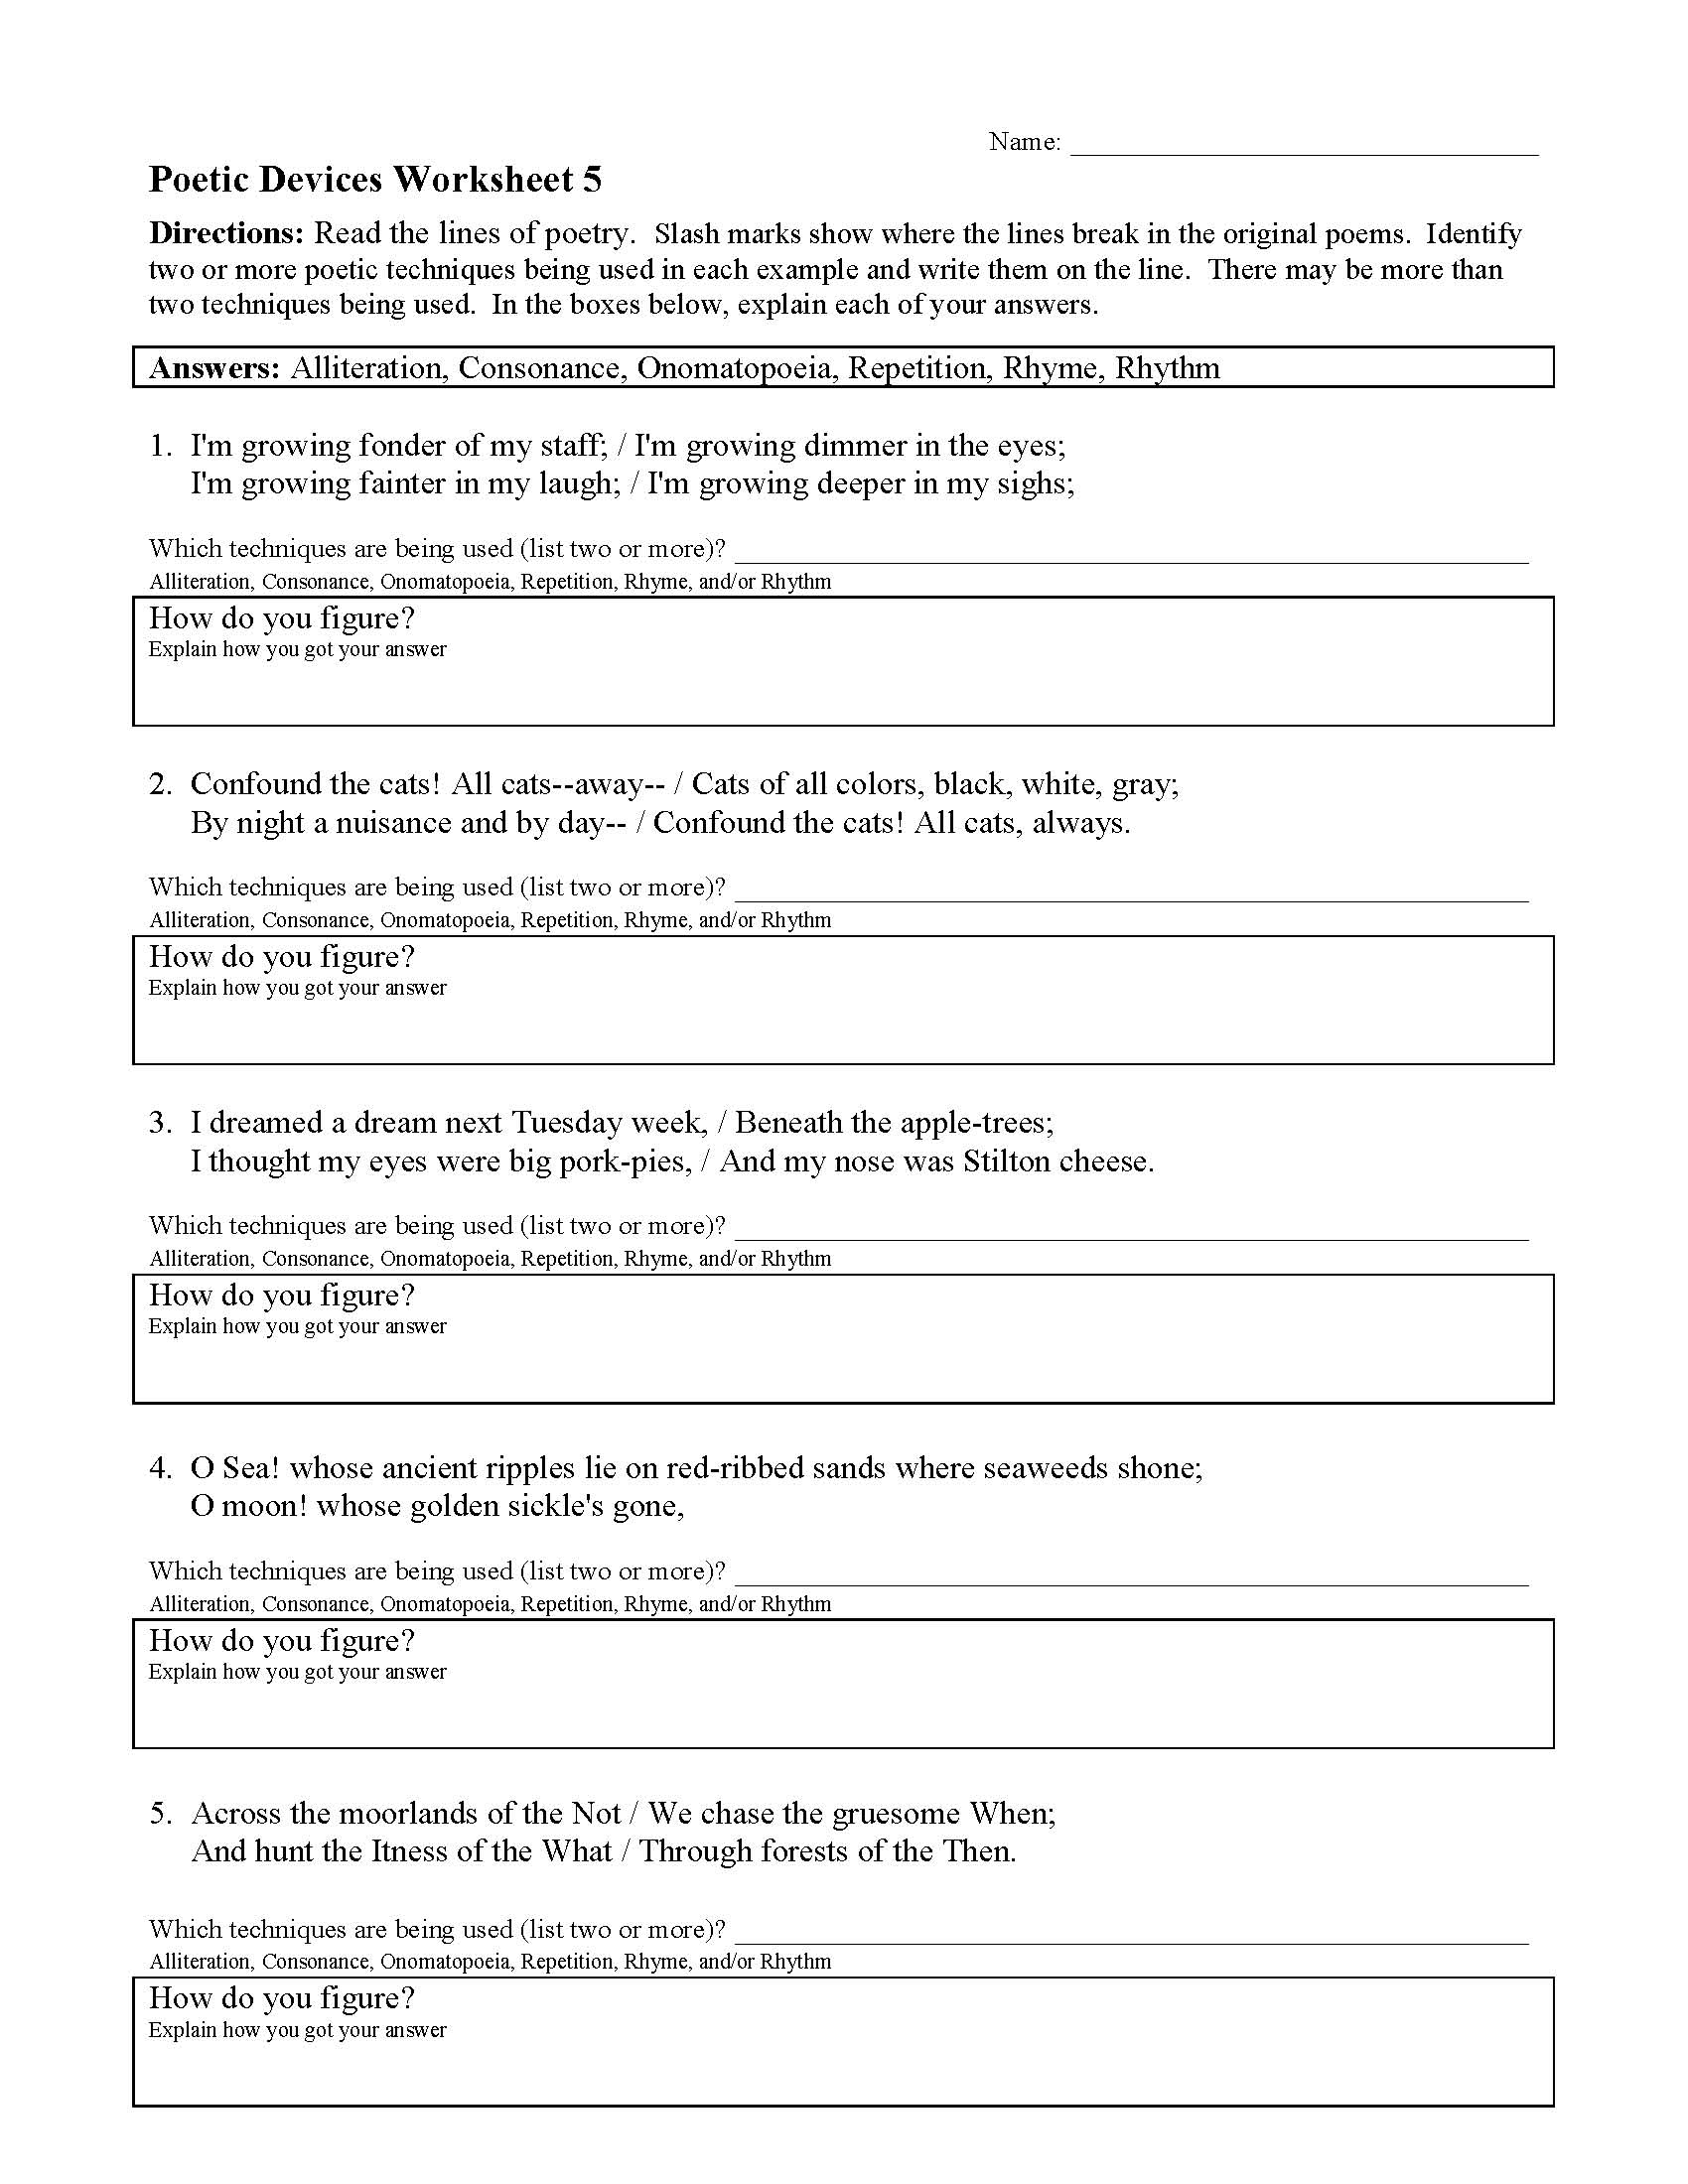 literary devices worksheet